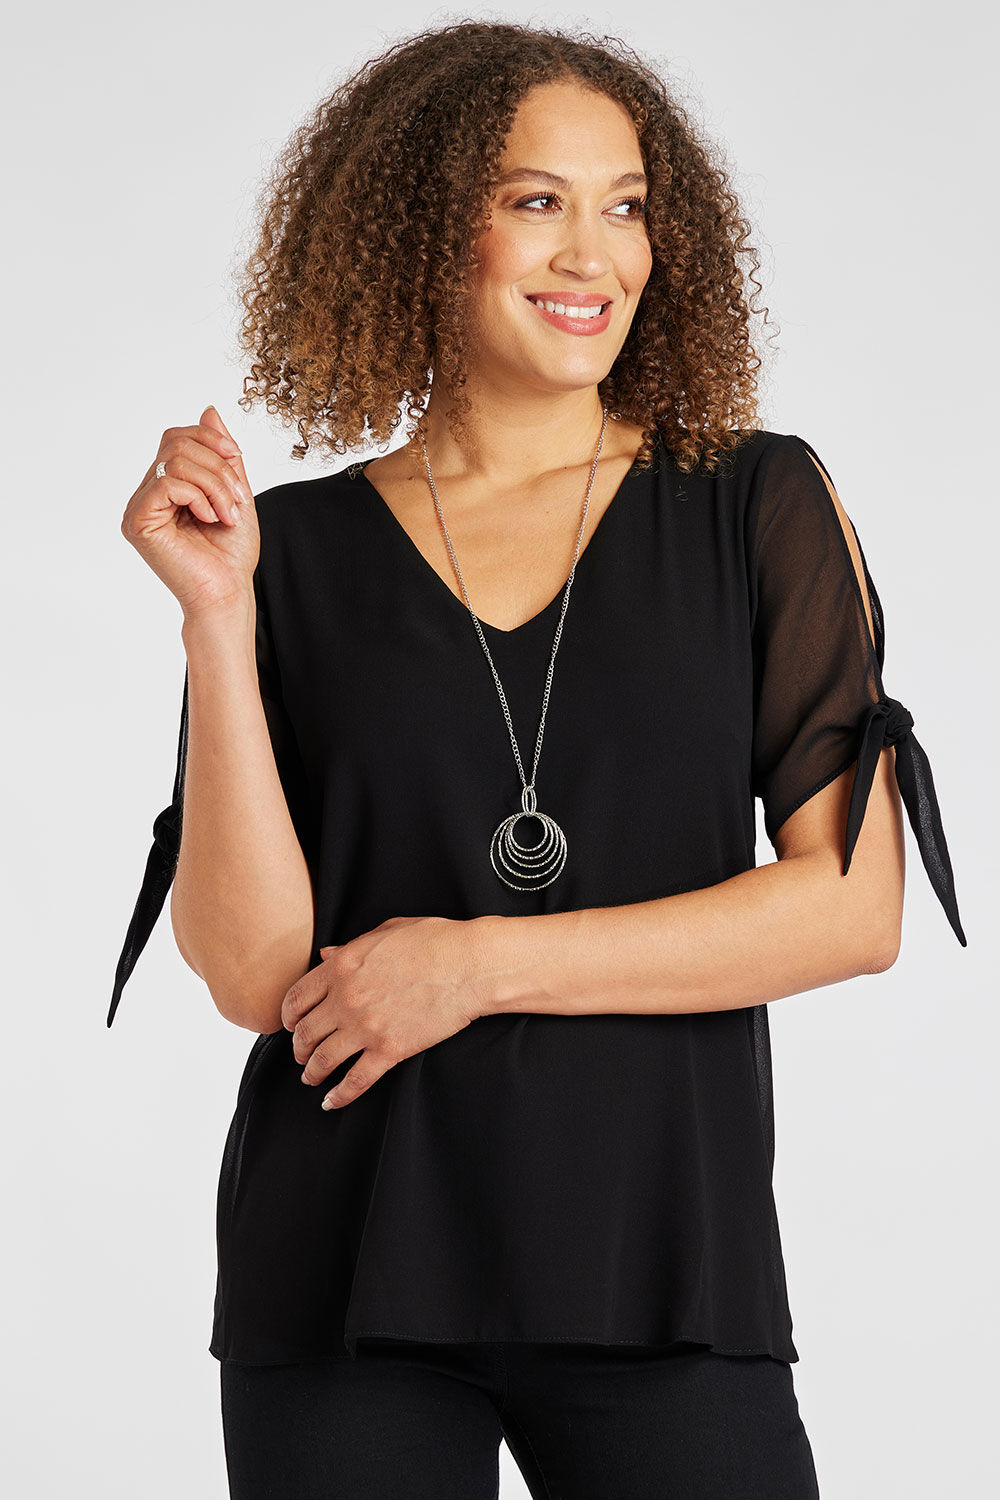 Bonmarche Black Short Sleeve Double Layer Chiffon Top With Necklace, Size: 12